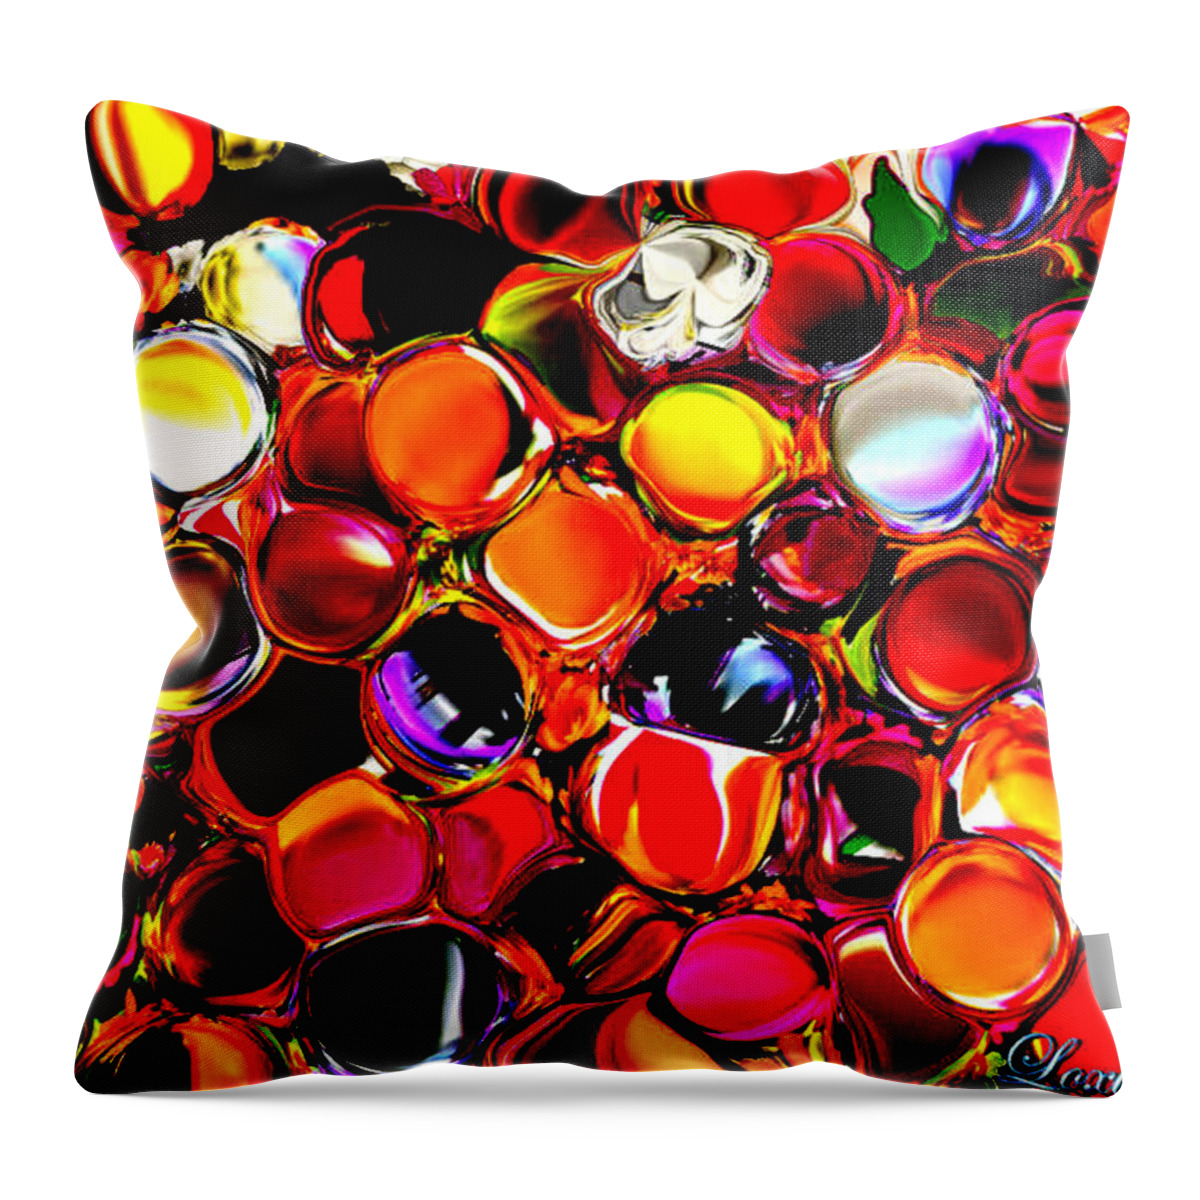 Digital Throw Pillow featuring the digital art Warm Colors by Loxi Sibley